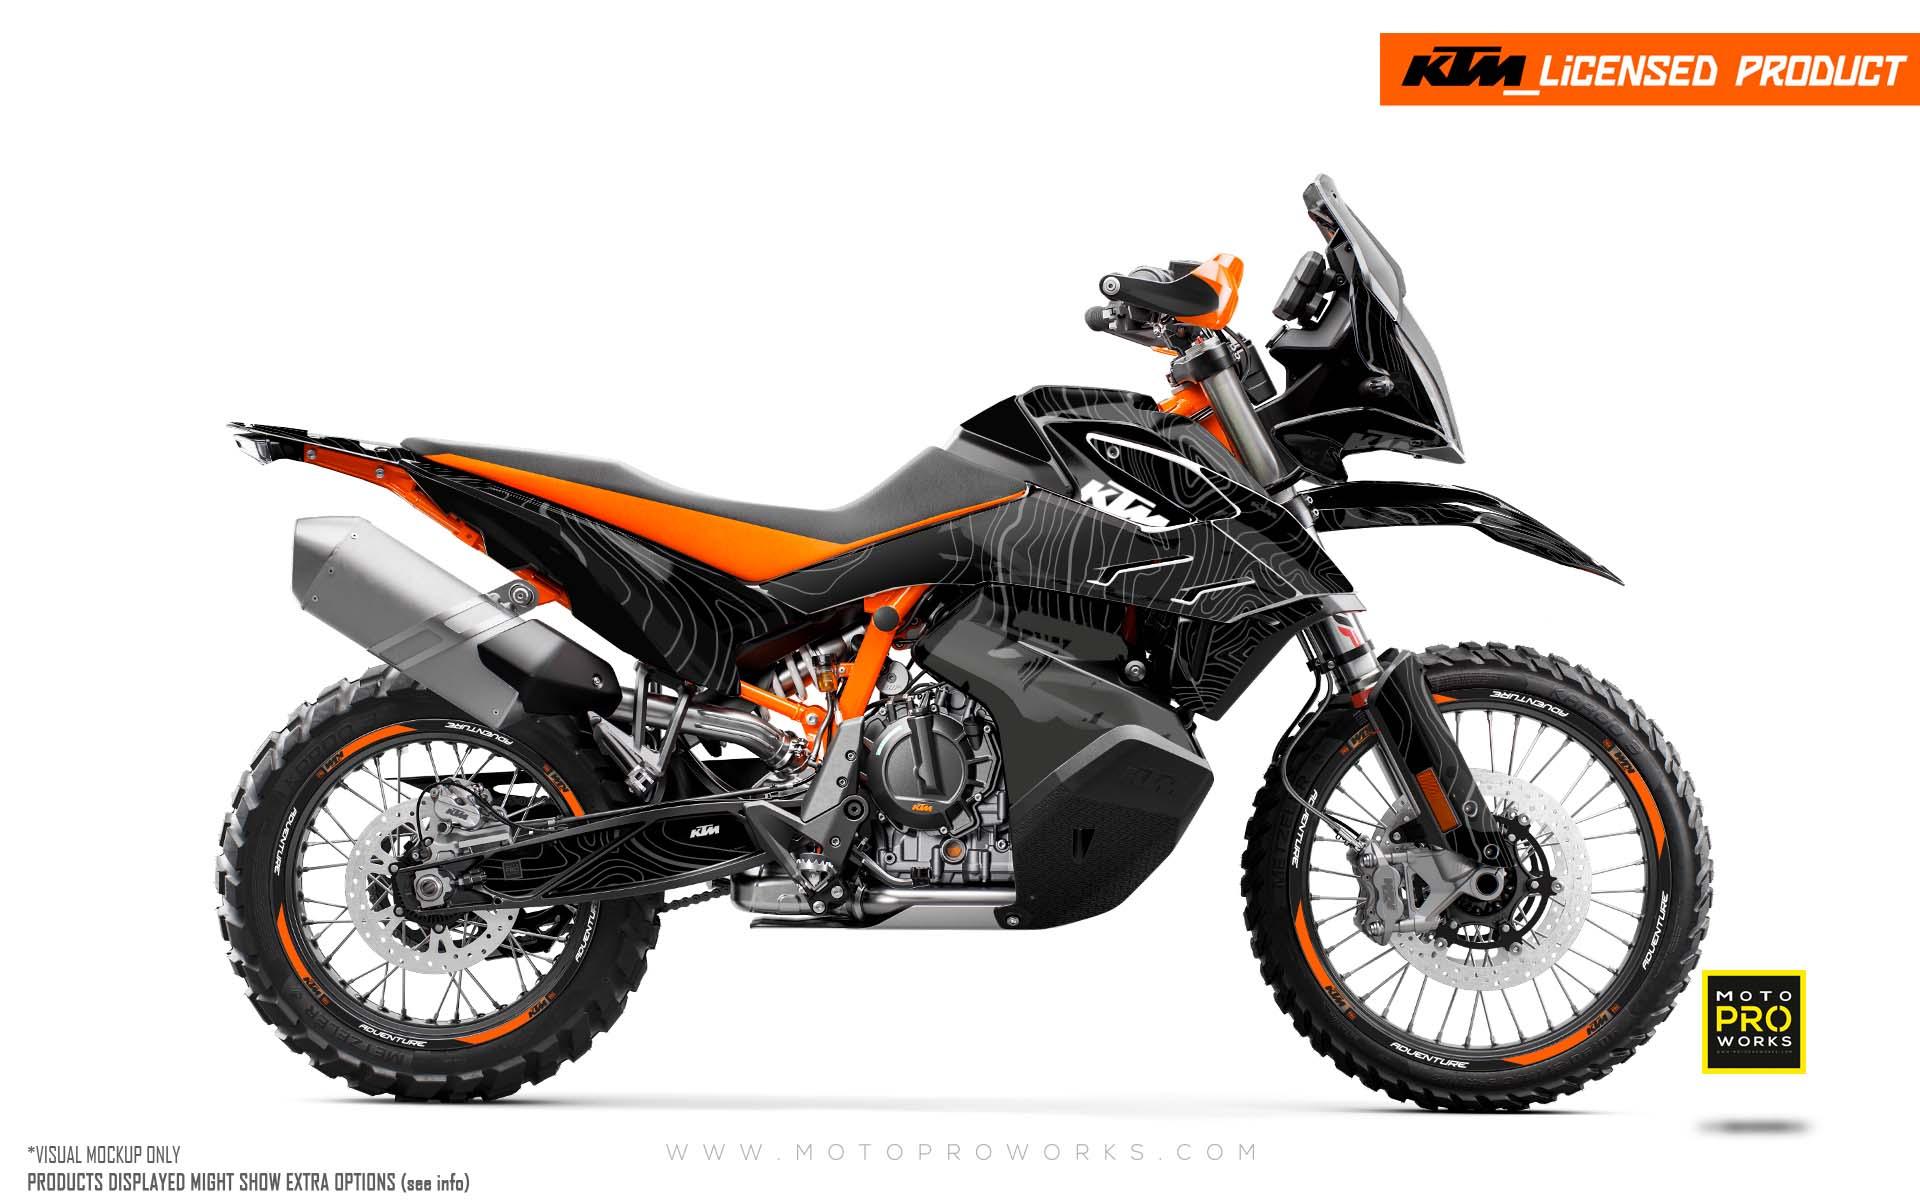 KTM 790/890 Adventure R/S GRAPHICS - "Topography" (Grey/White) - MotoProWorks